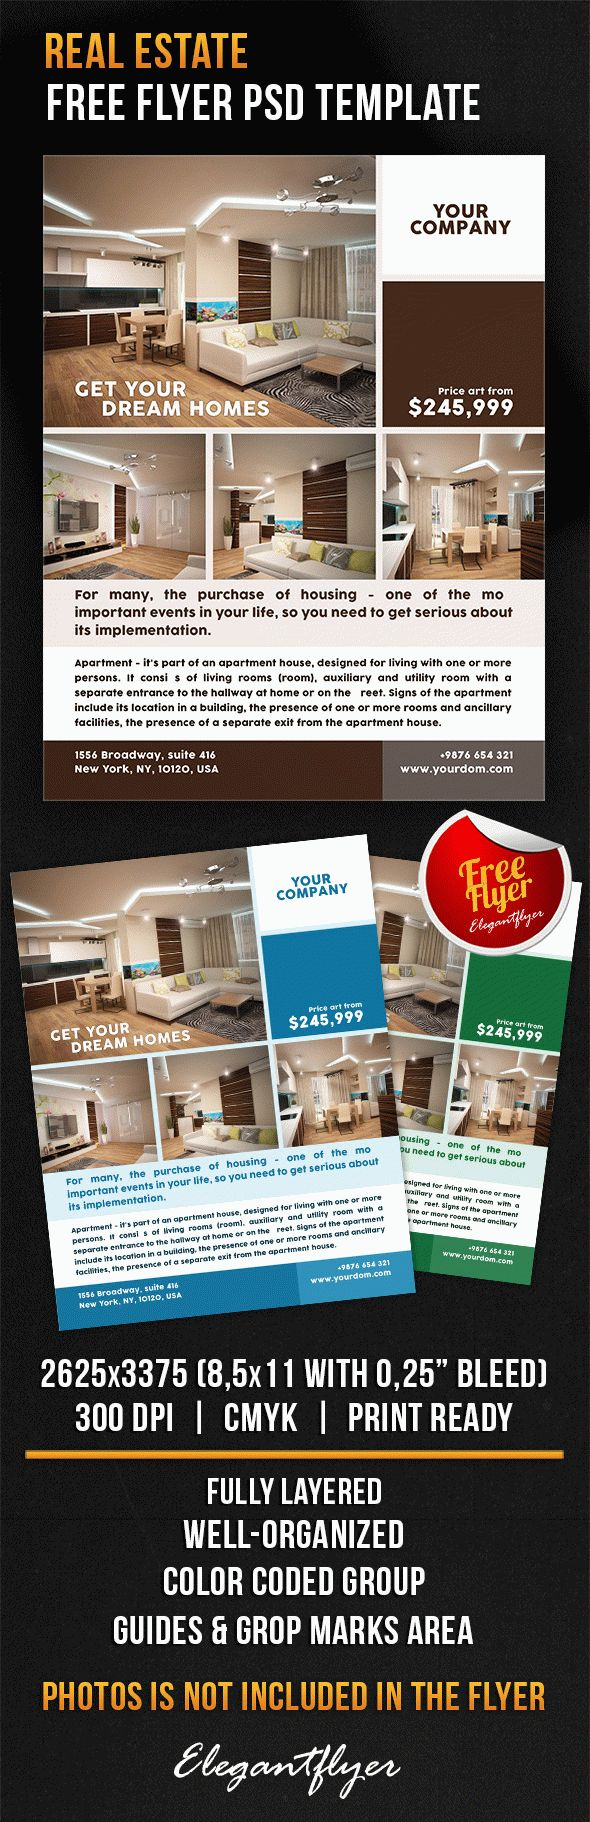 apartment flyers - Sablon In Apartment Rental Flyer Template With Regard To Apartment Rental Flyer Template